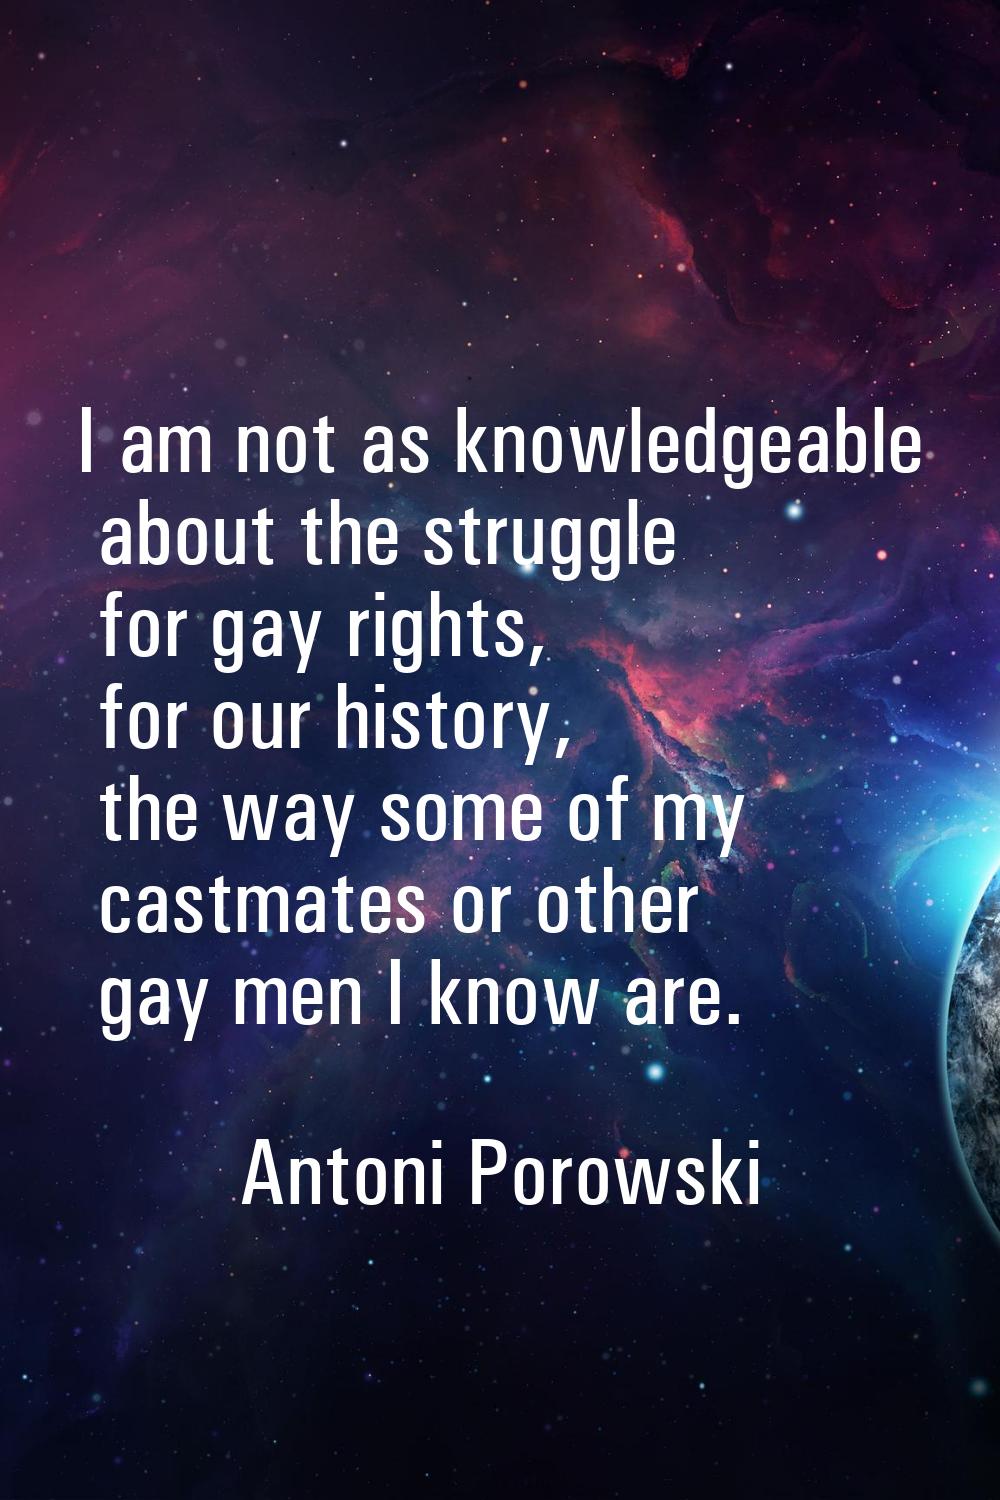 I am not as knowledgeable about the struggle for gay rights, for our history, the way some of my ca